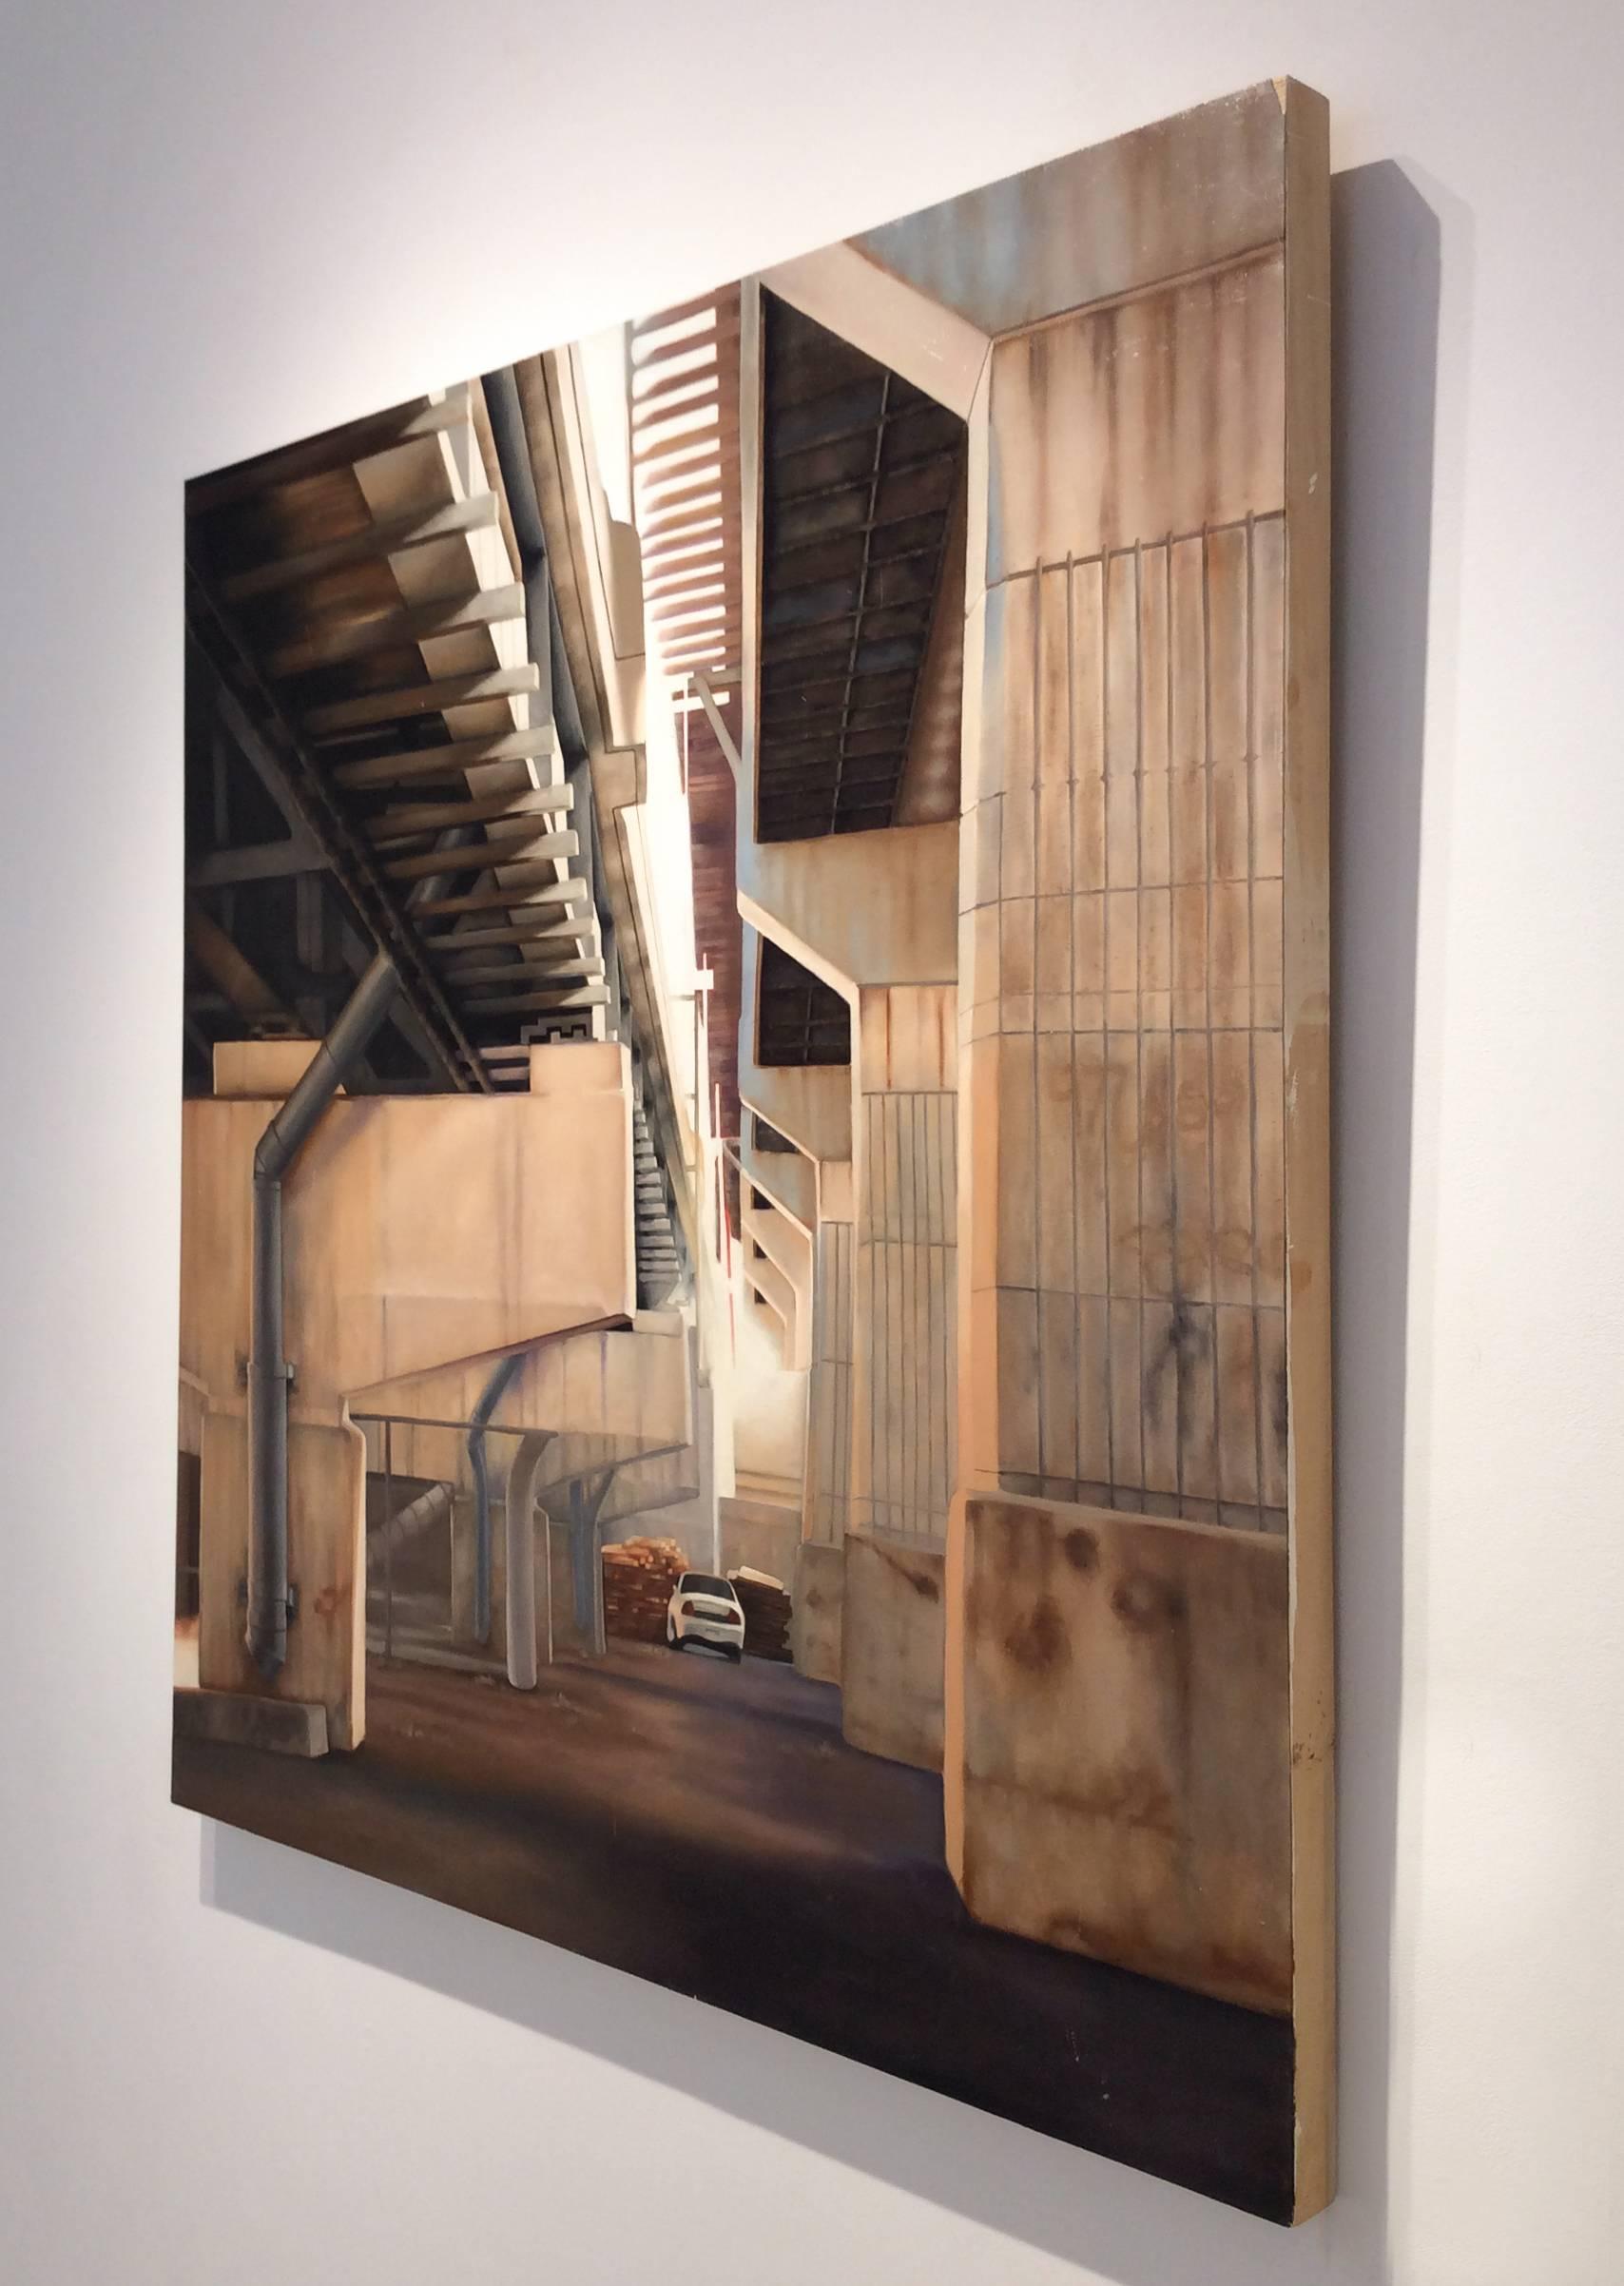 Contemporary photo-realist style painting of a urban industrial New York City underpass
48 x 50 inches, Oil on panel
wire and d-ring on the back, ready to hang as is

Created in 2006, this painting demonstrates Eileen Murphy's talent for